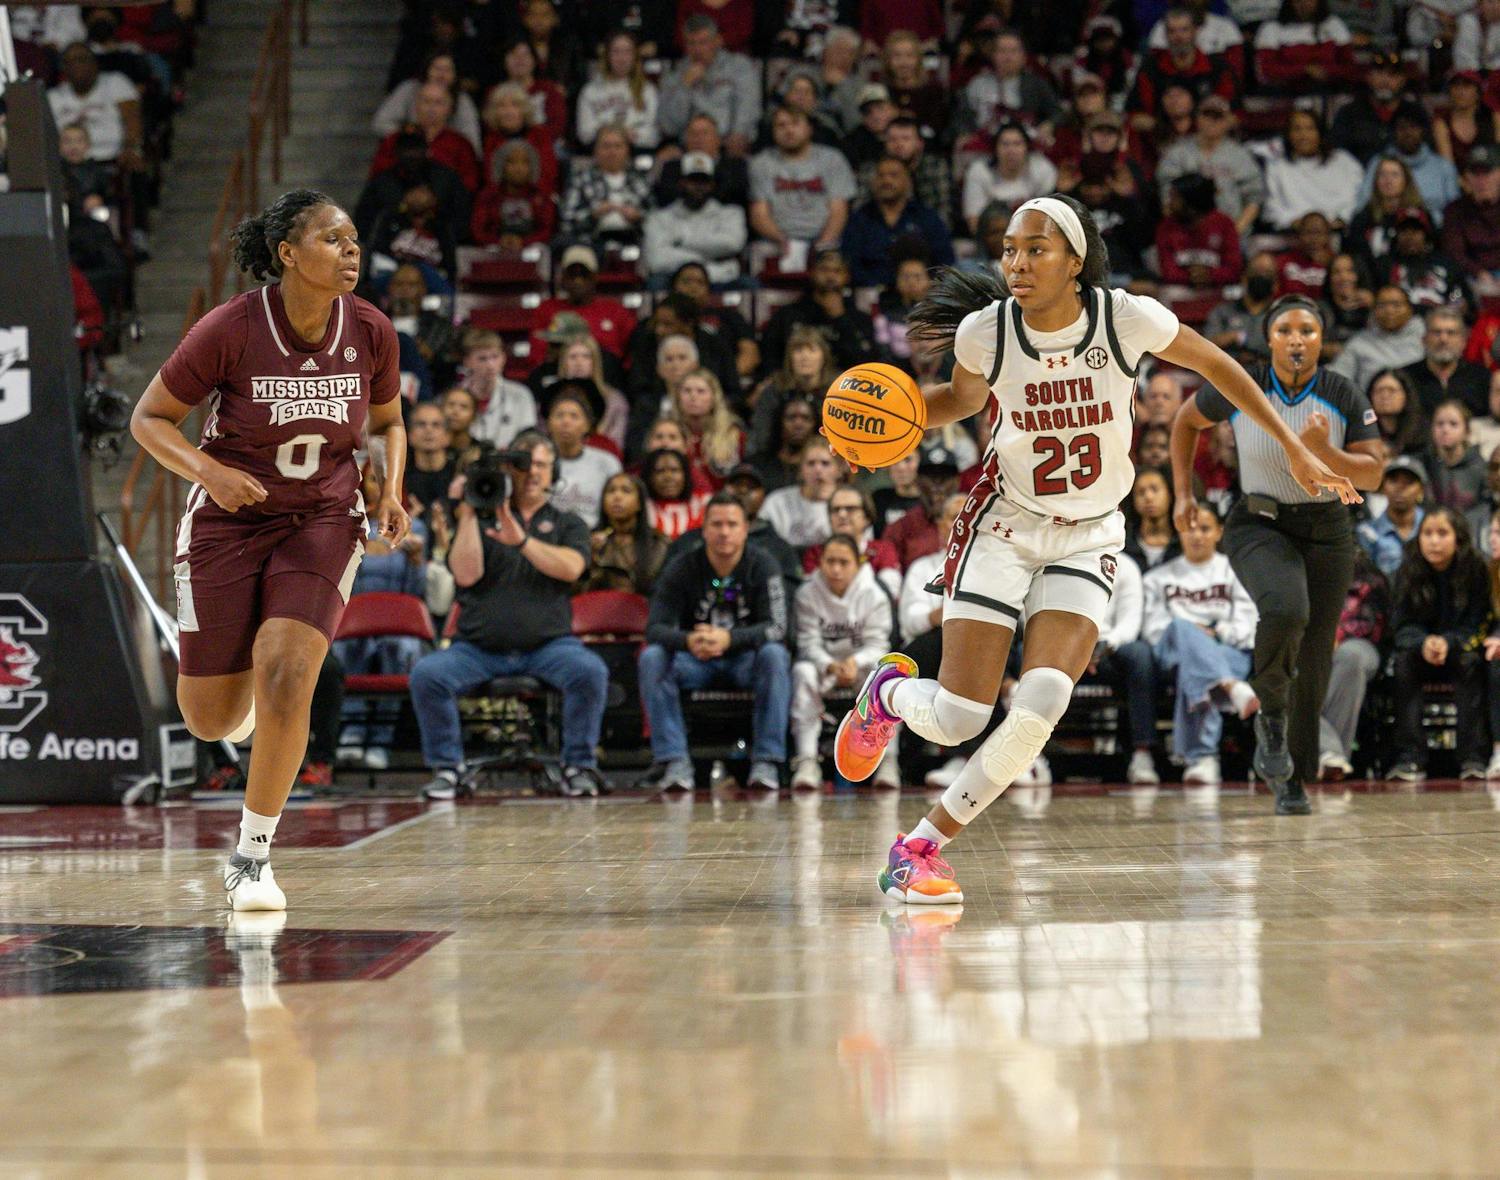 The Gamecocks women's basketball team locked in a win over the Mississippi State Bulldogs Sunday afternoon, holding onto its undefeated record. The team kept the lead in all four periods, ending the Jan. 7 match with a score of 89-66. Bree Hall scored 15 points, helping to close an uncomfortably close margin in the third quarter with assistance during the rest of the game from Kamilla Cardoso, who scored 13 points. Up next, the Gamecocks are scheduled to face Missouri Thursday on the road.